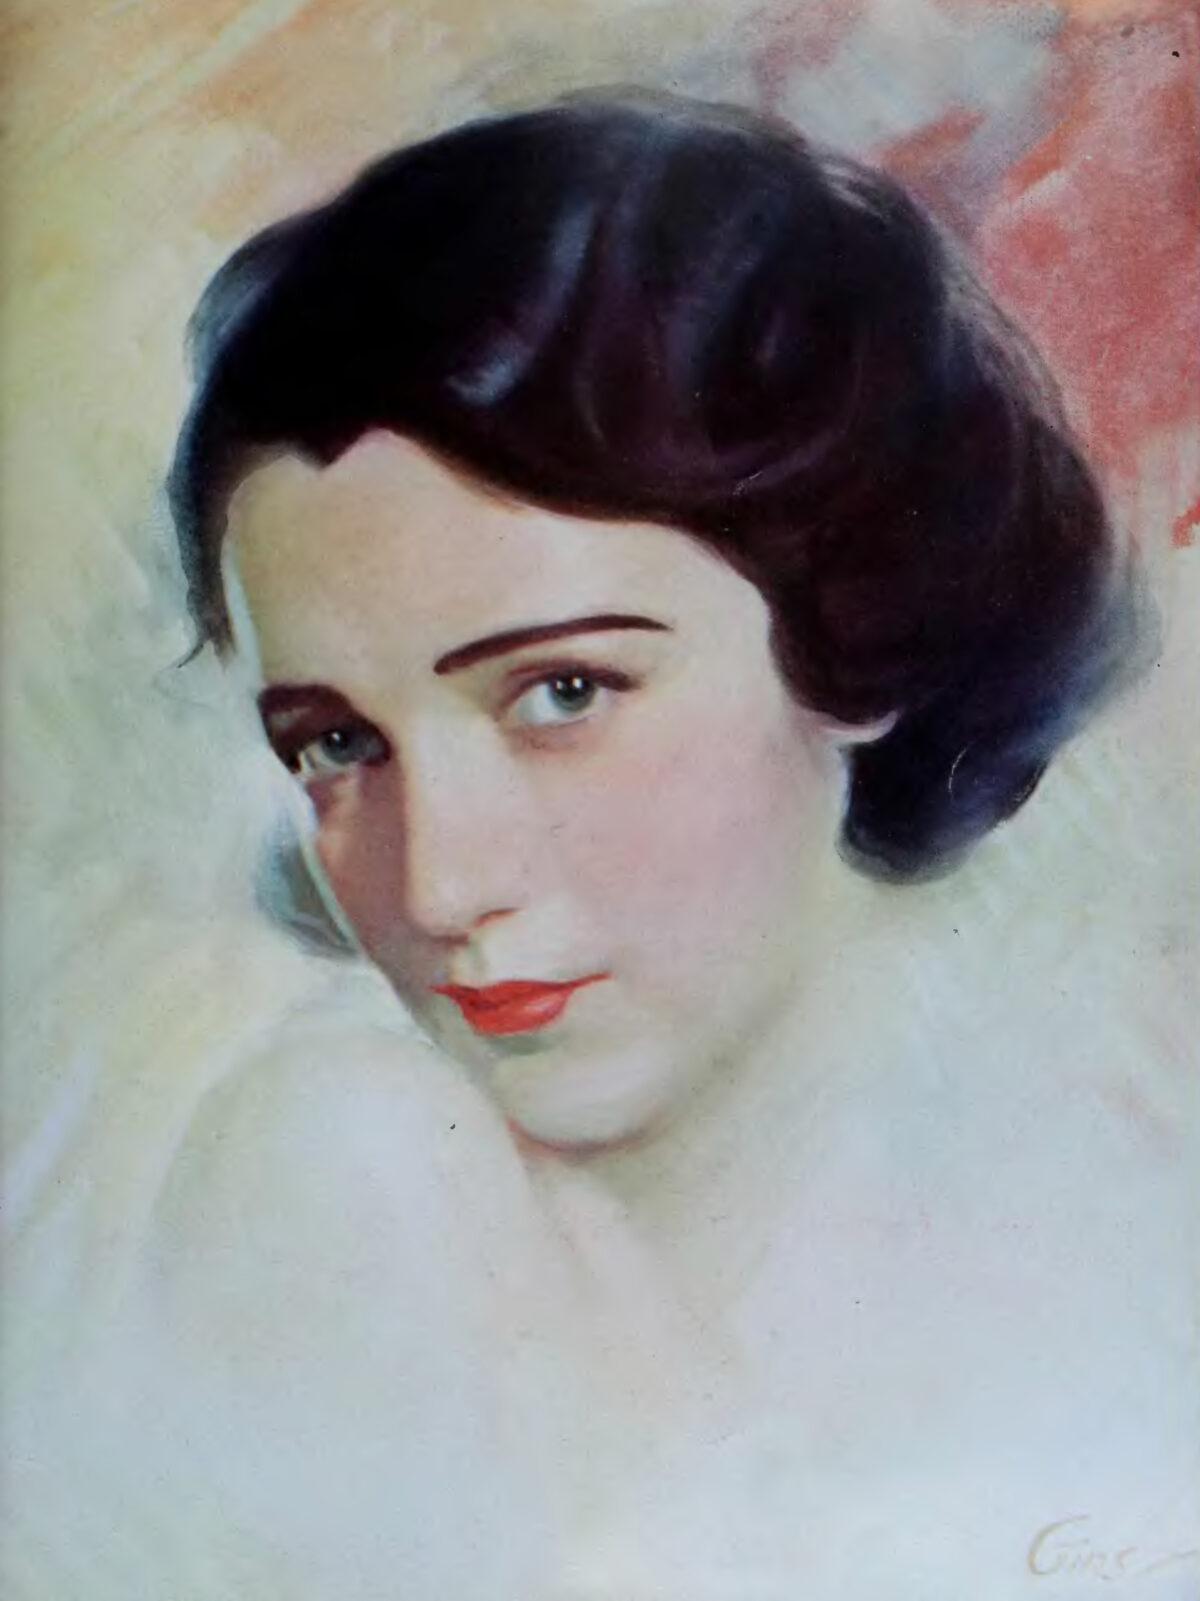 An image of Bebe Daniels for "The Film Daily" in 1929. (Public Domain)